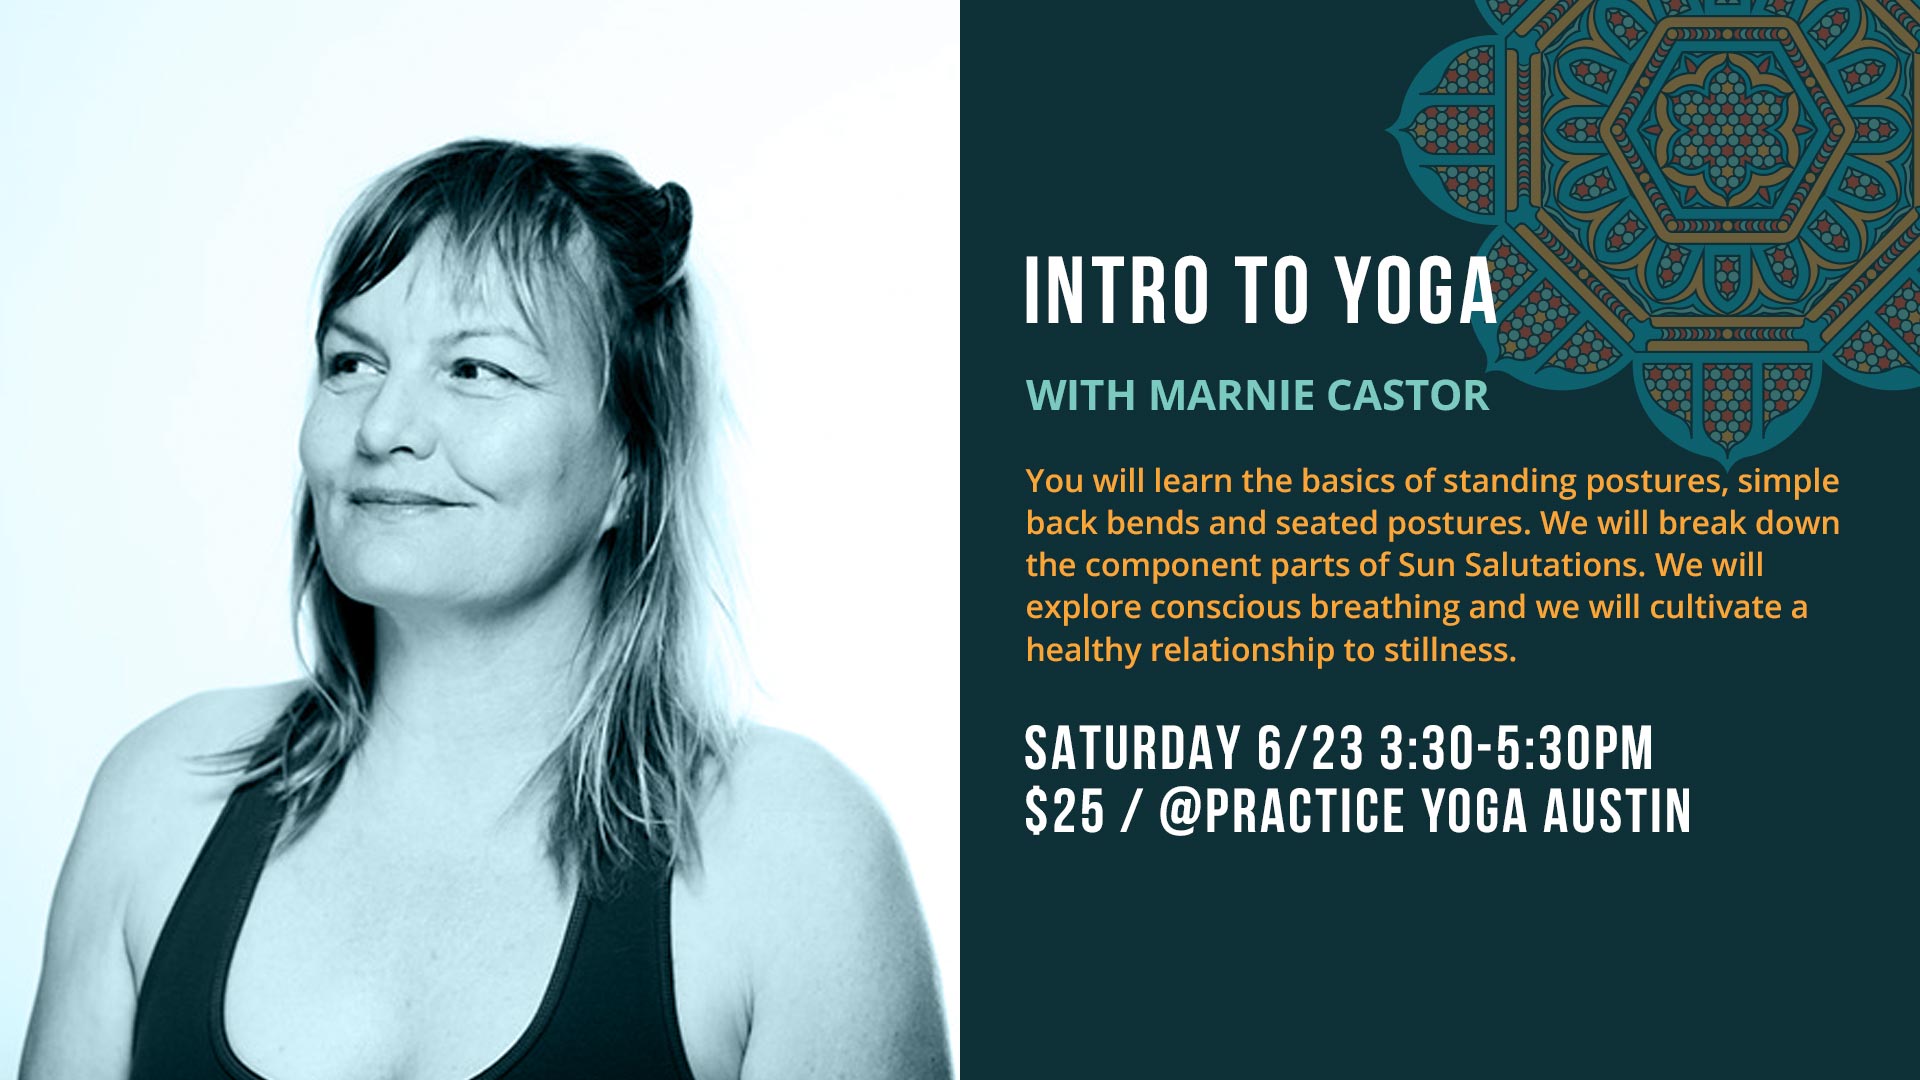 Intro to Yoga with Marnie Castor at Practice Yoga Austin